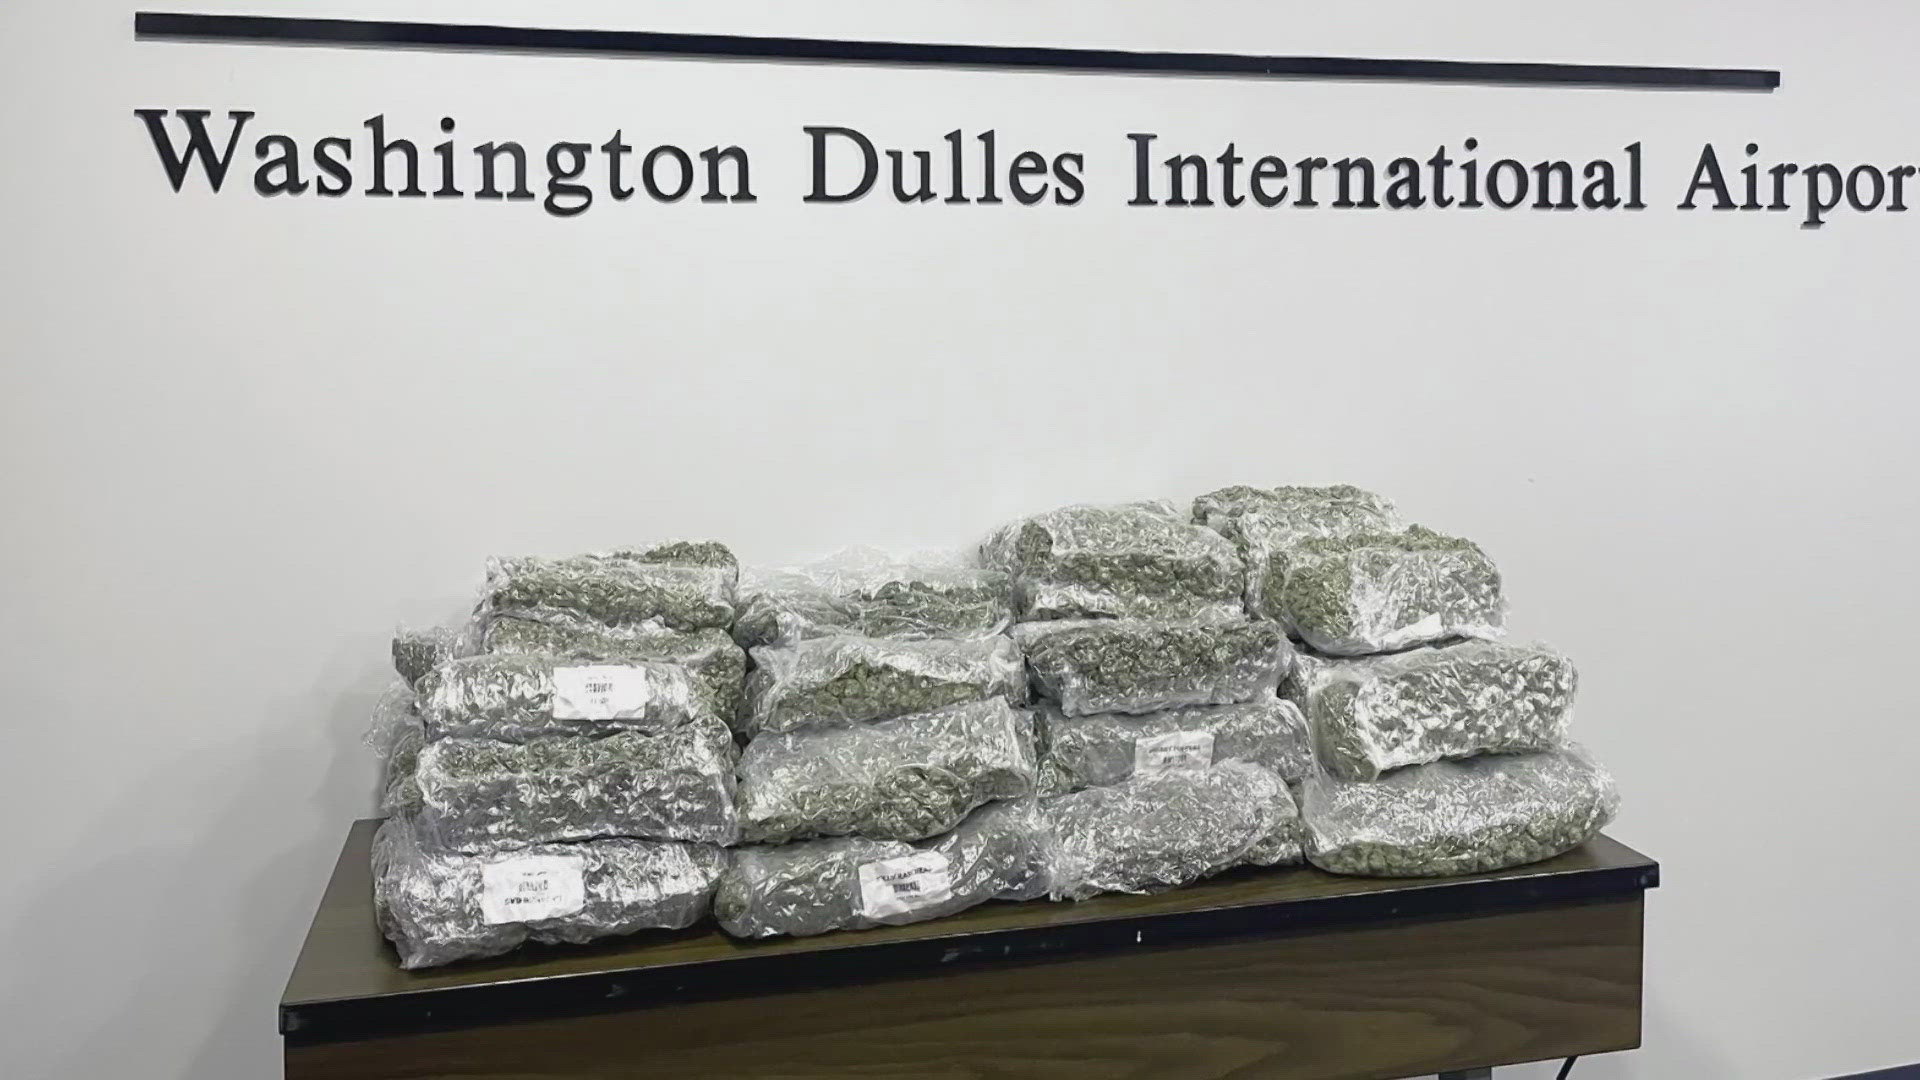 Customs and Border Protection agents made a major drug bust at Dulles International Airport last week.